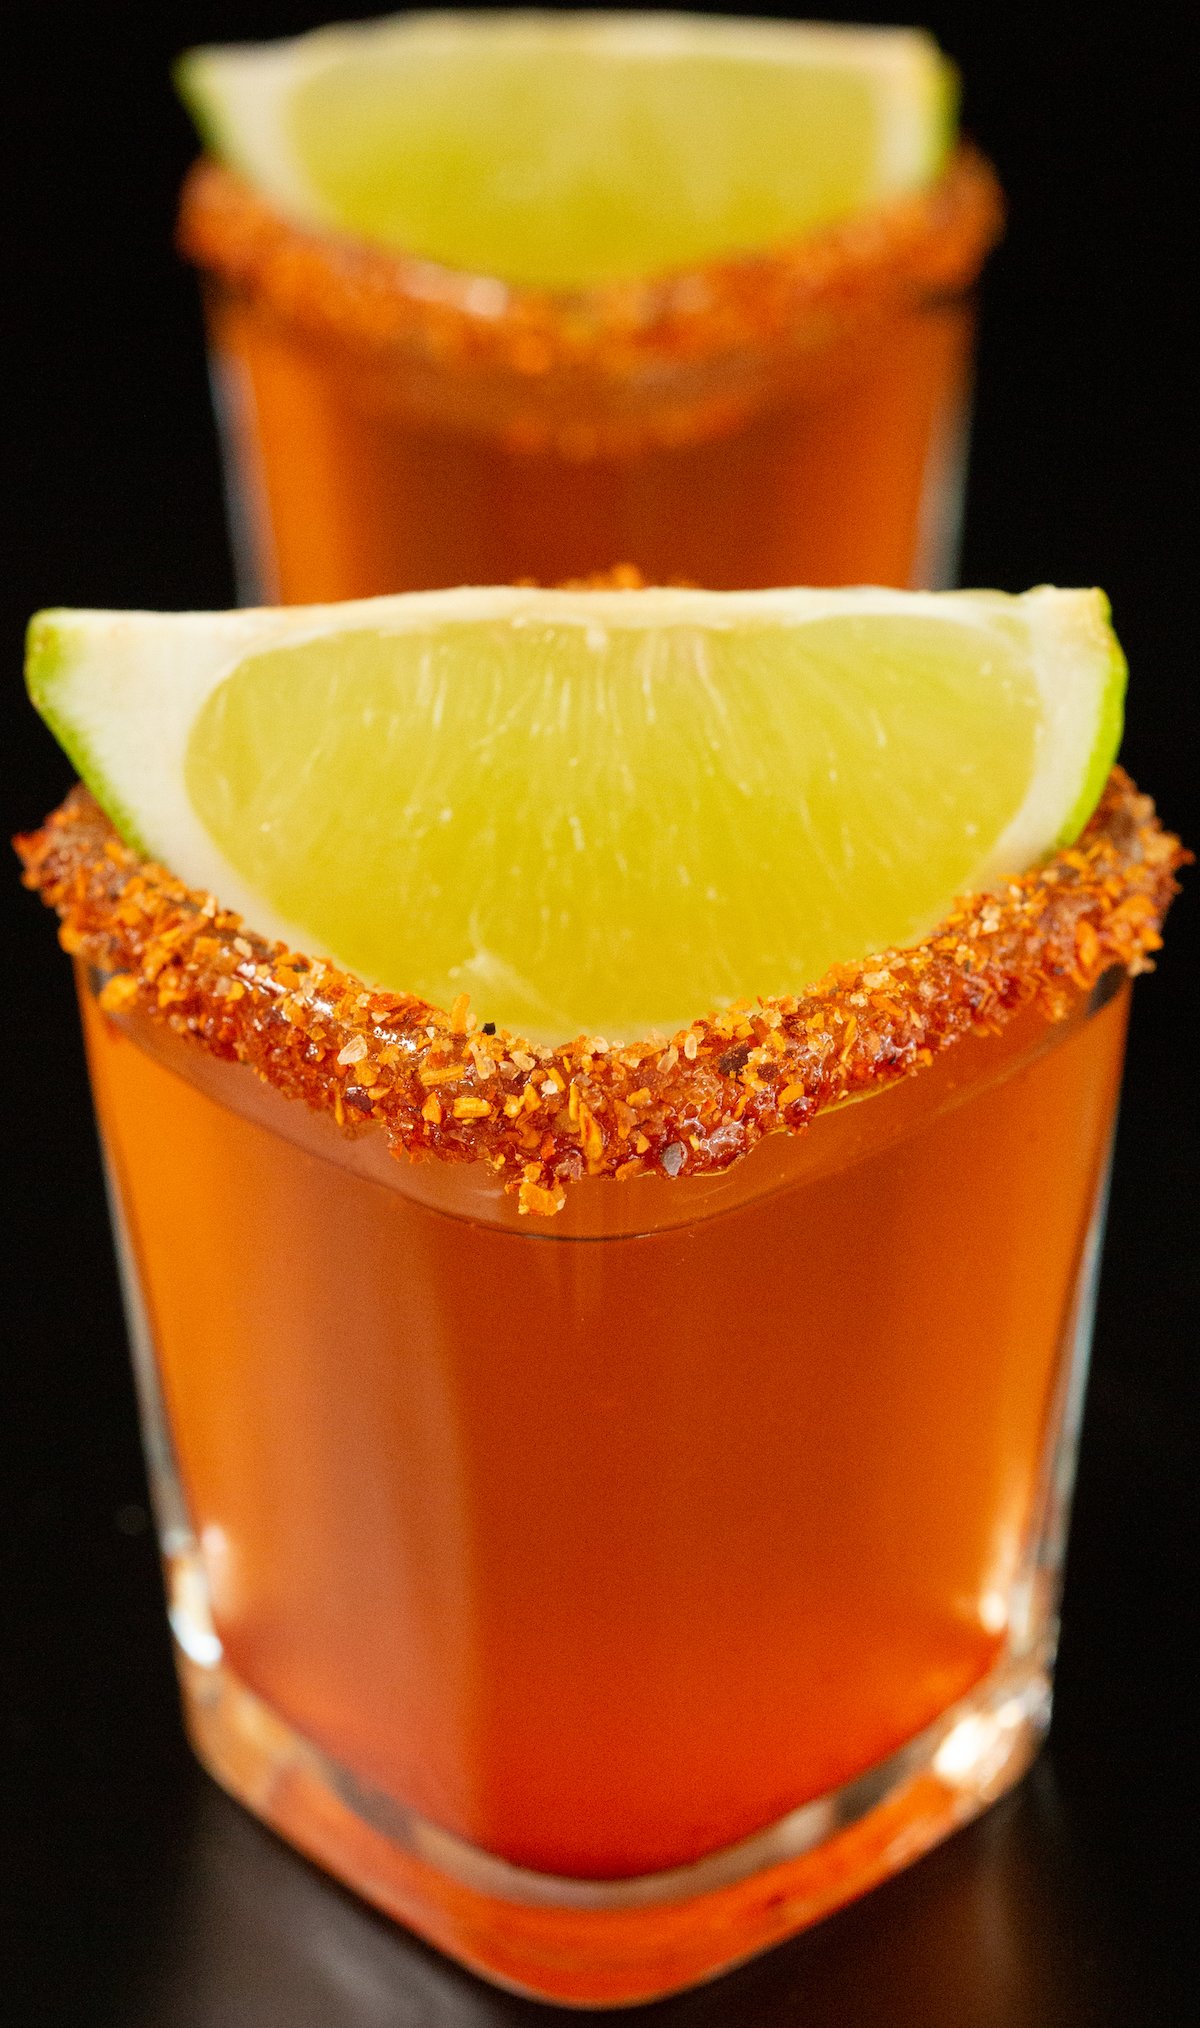 Two square shot glasses filled with a pinkish-red Mexican Candy shot. There is a lime wedge garnish and a chili powder coated rim. 